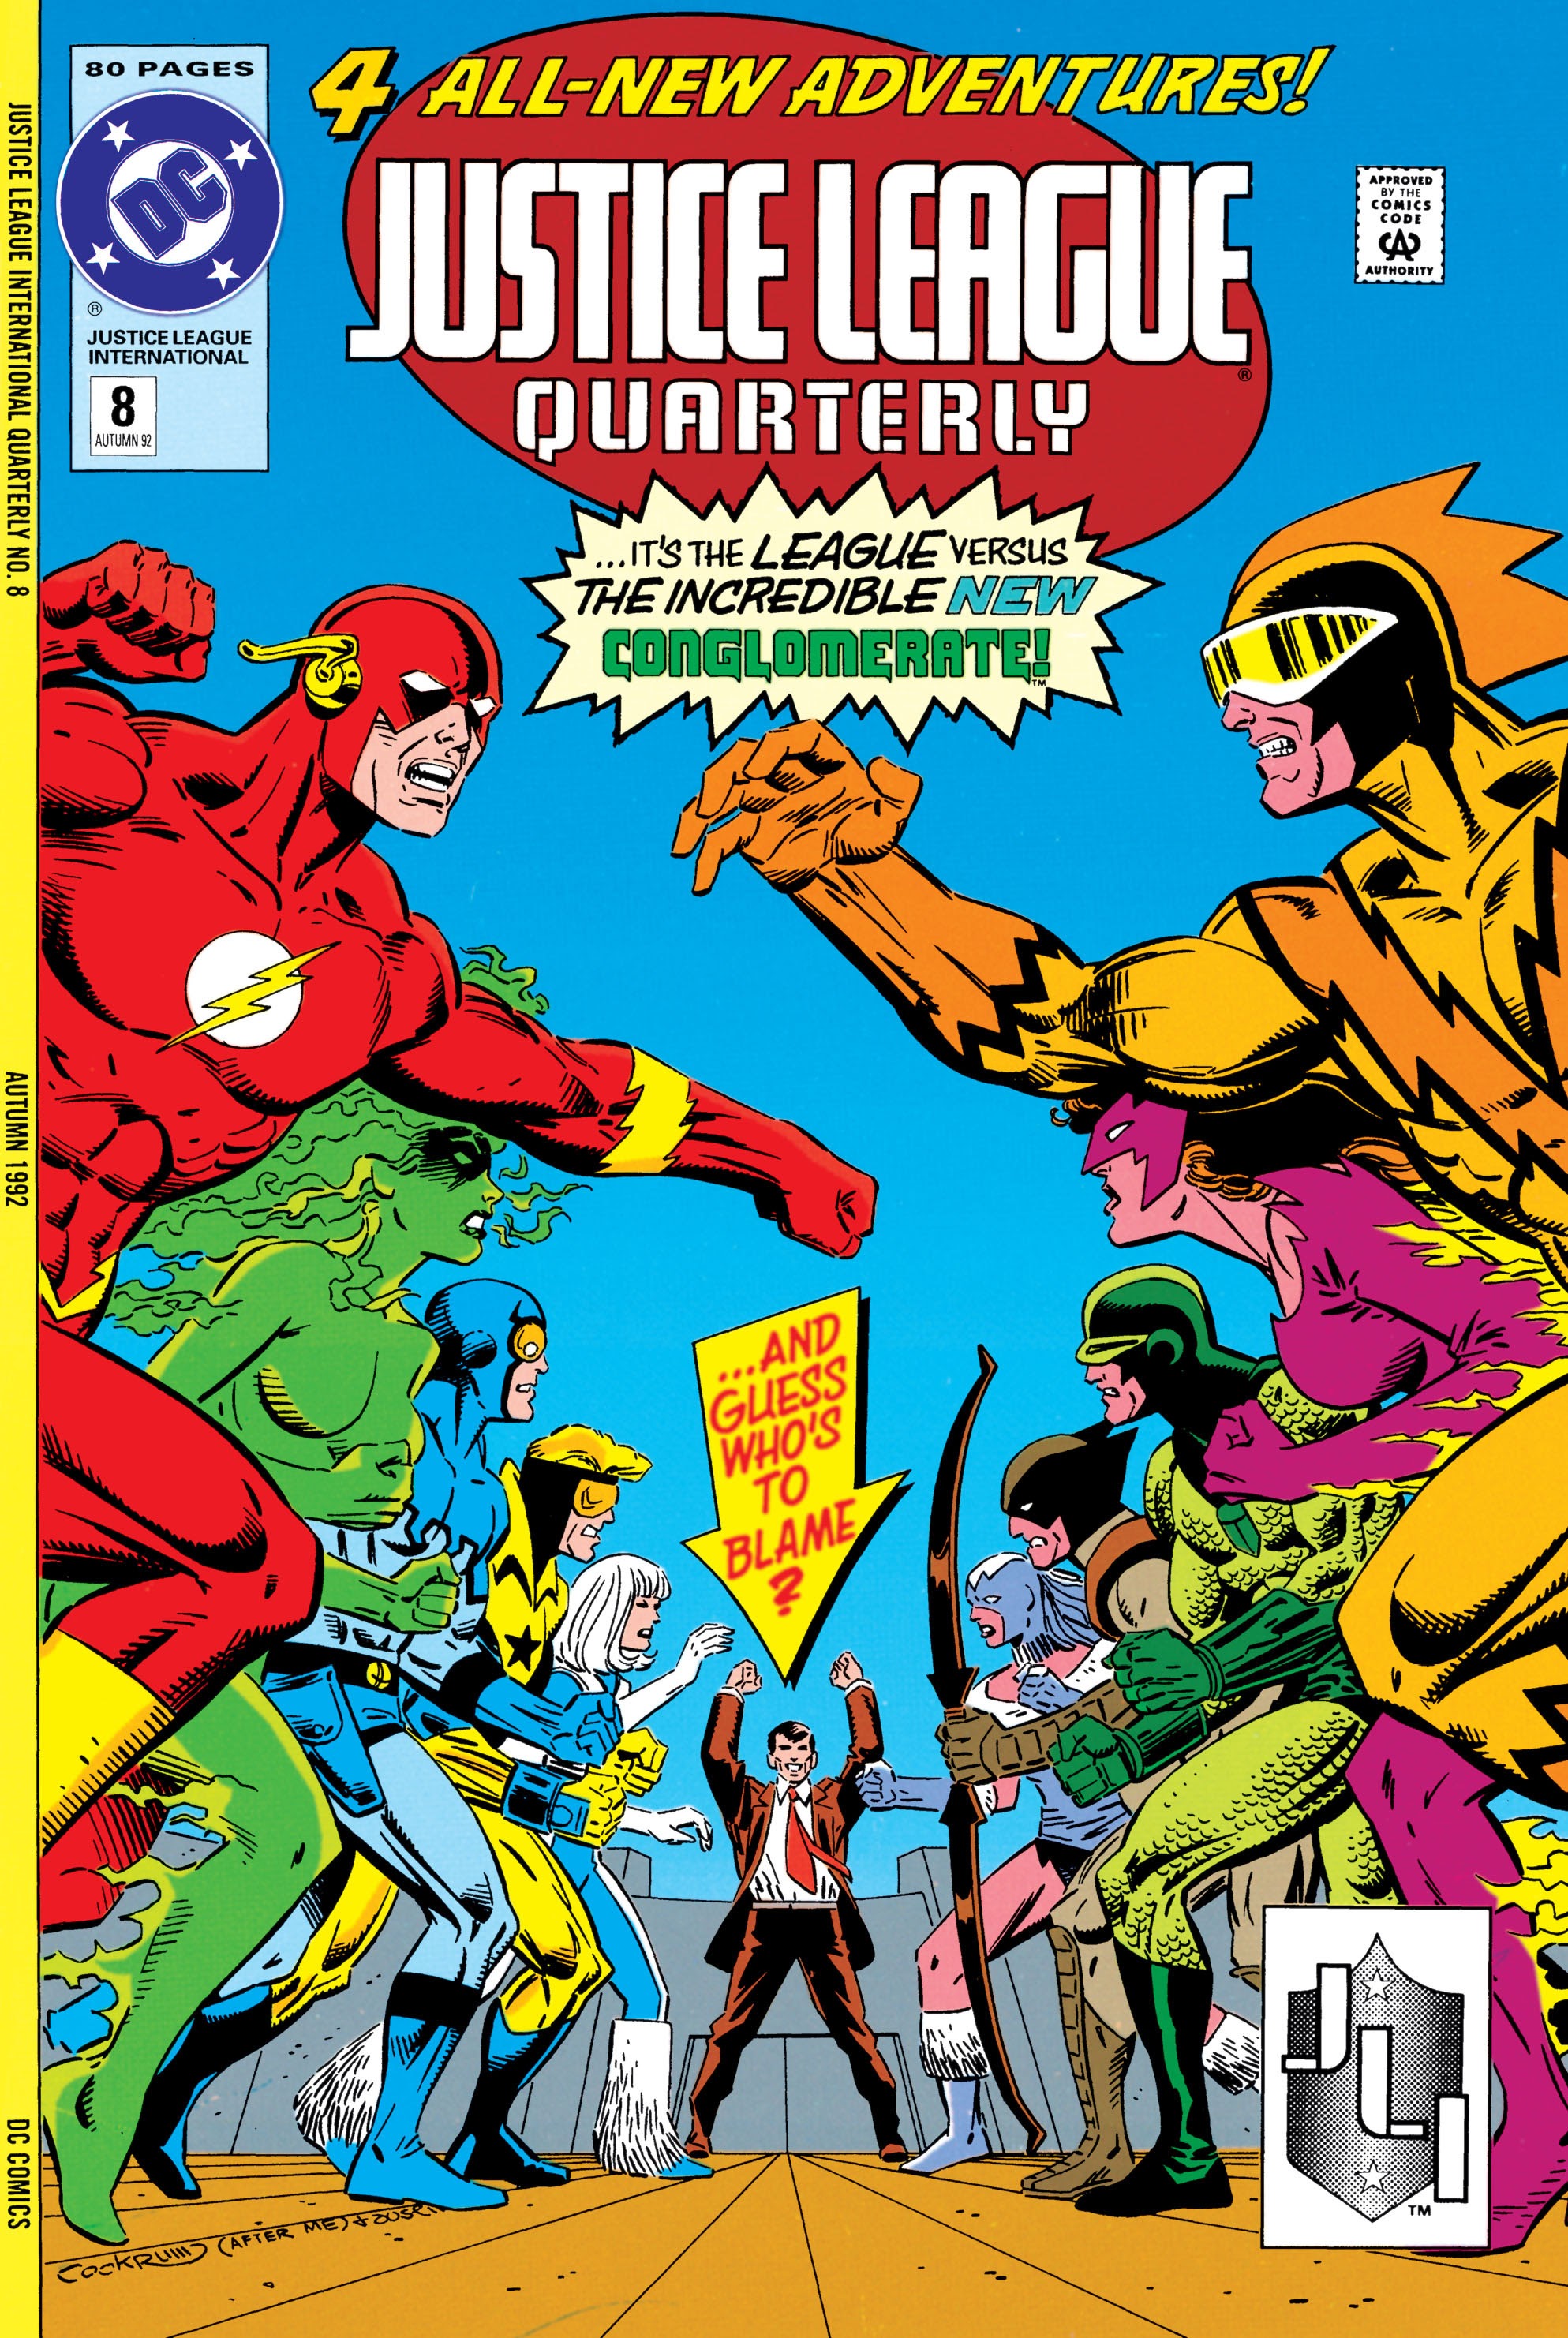 Read online Justice League Quarterly comic -  Issue #8 - 1